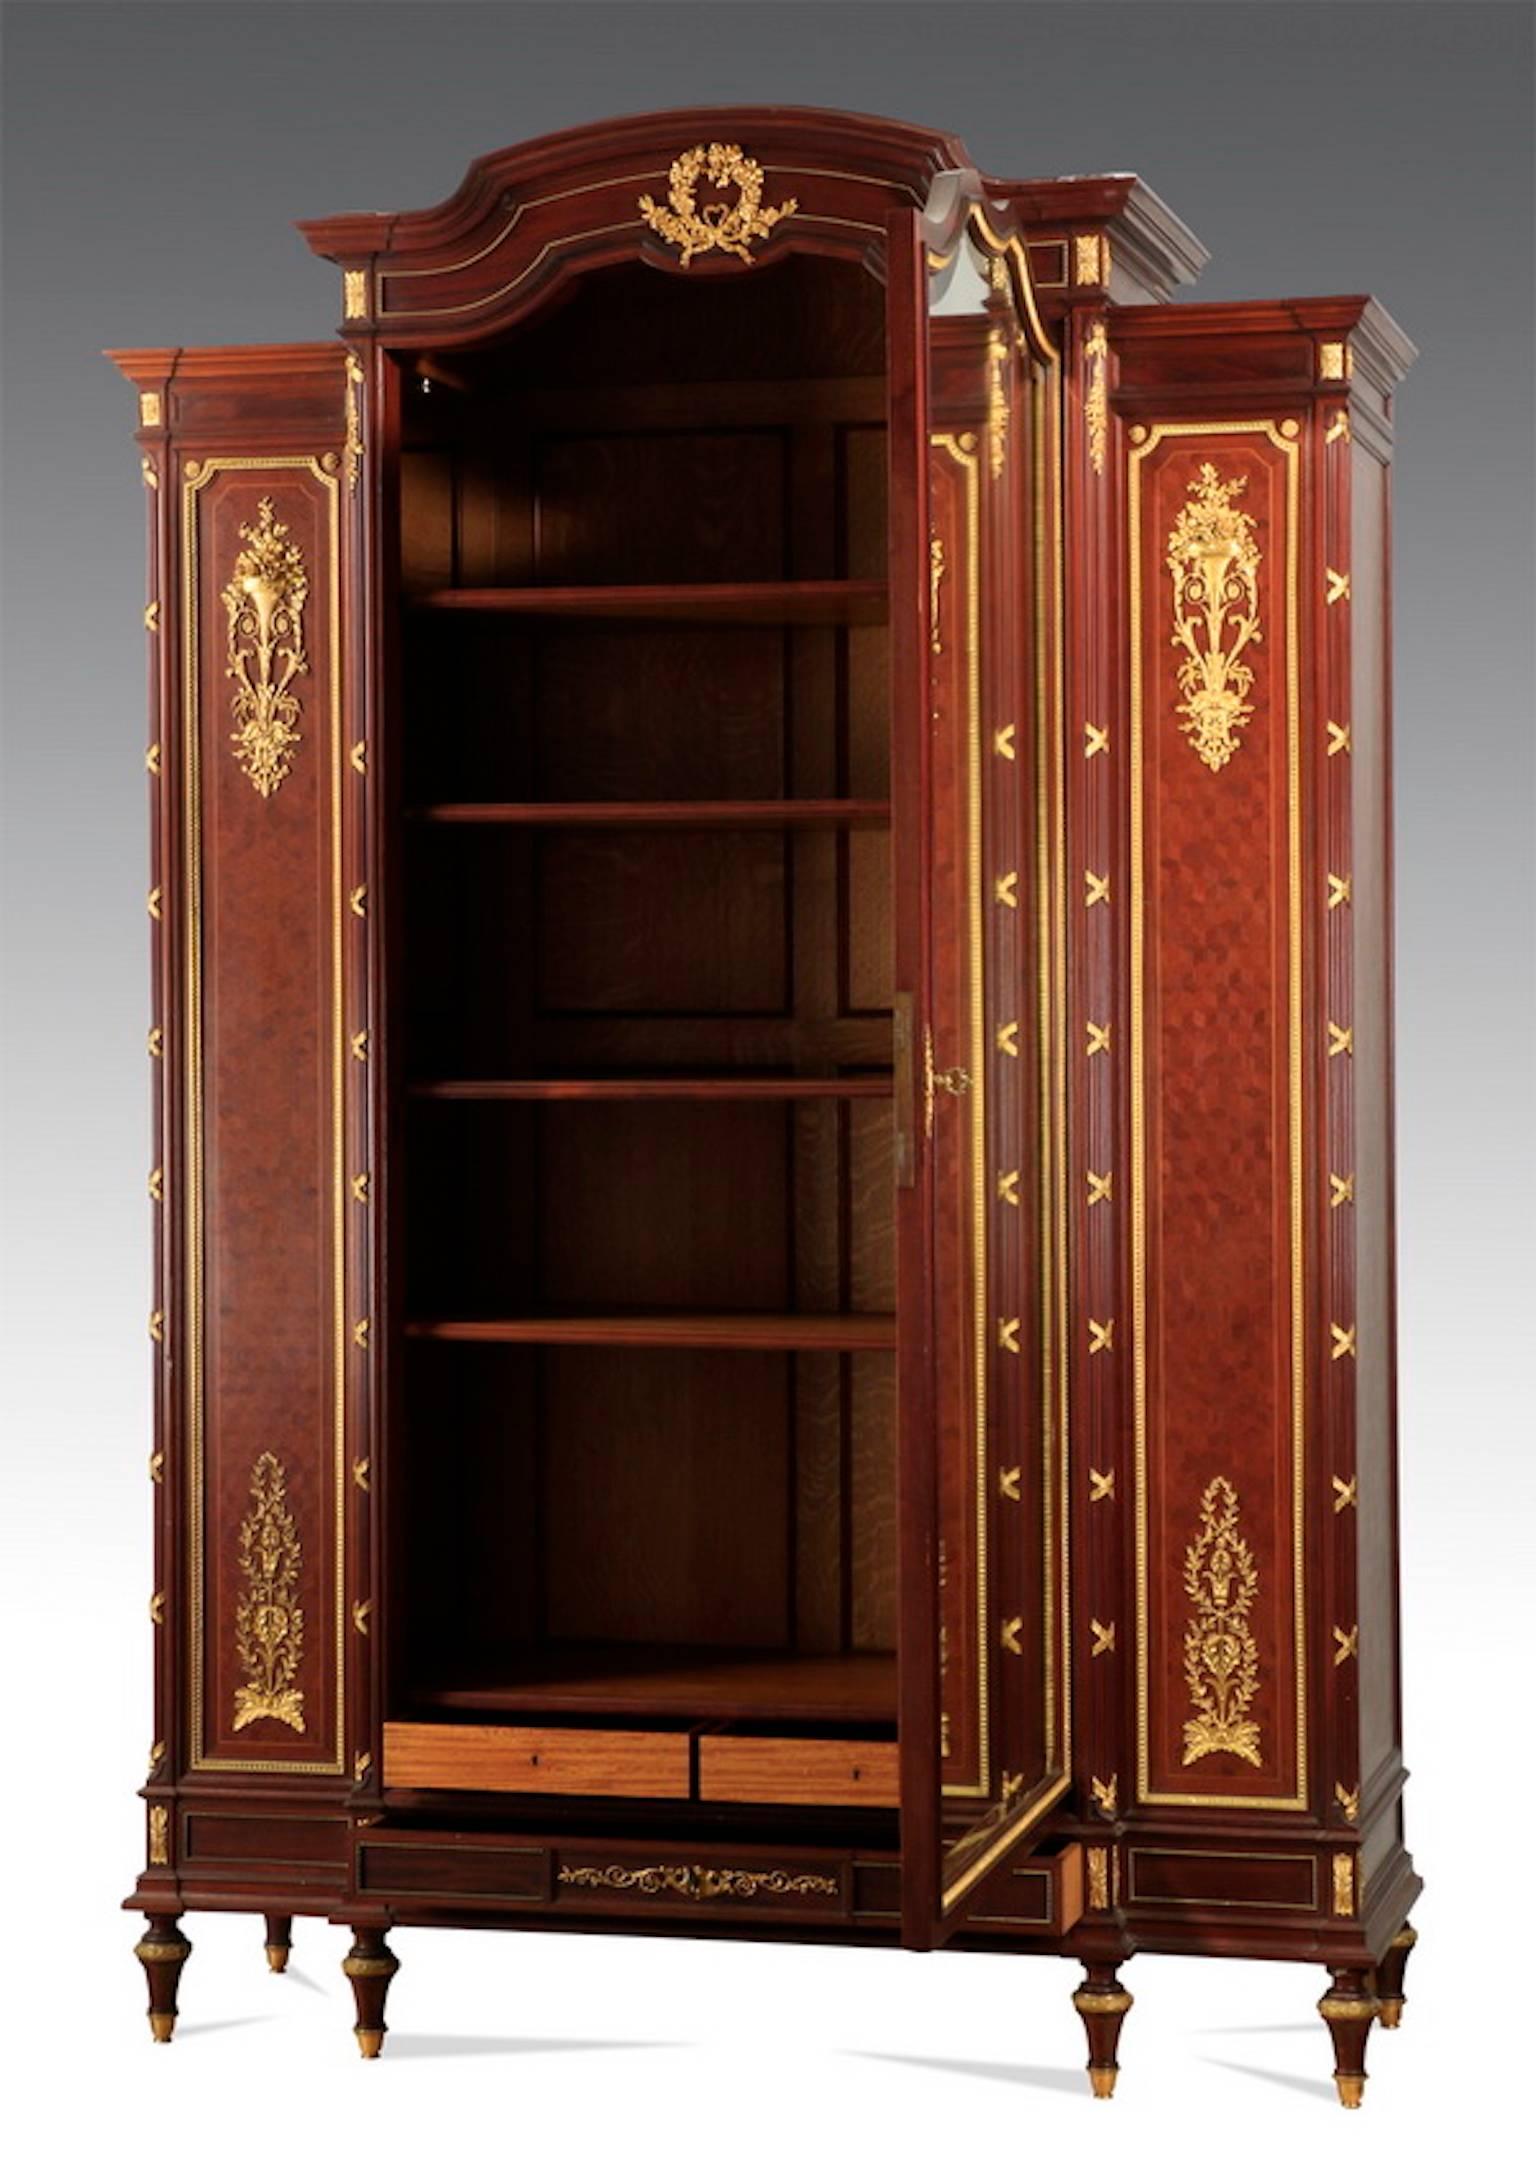 Fine 19th century French gilt bronze-mounted, parquetry inlaid armoire with shaped pediment and central beveled mirror, the single door opening to a fitted interior with coffered back and molded edge shelves, above two small interior drawers, the